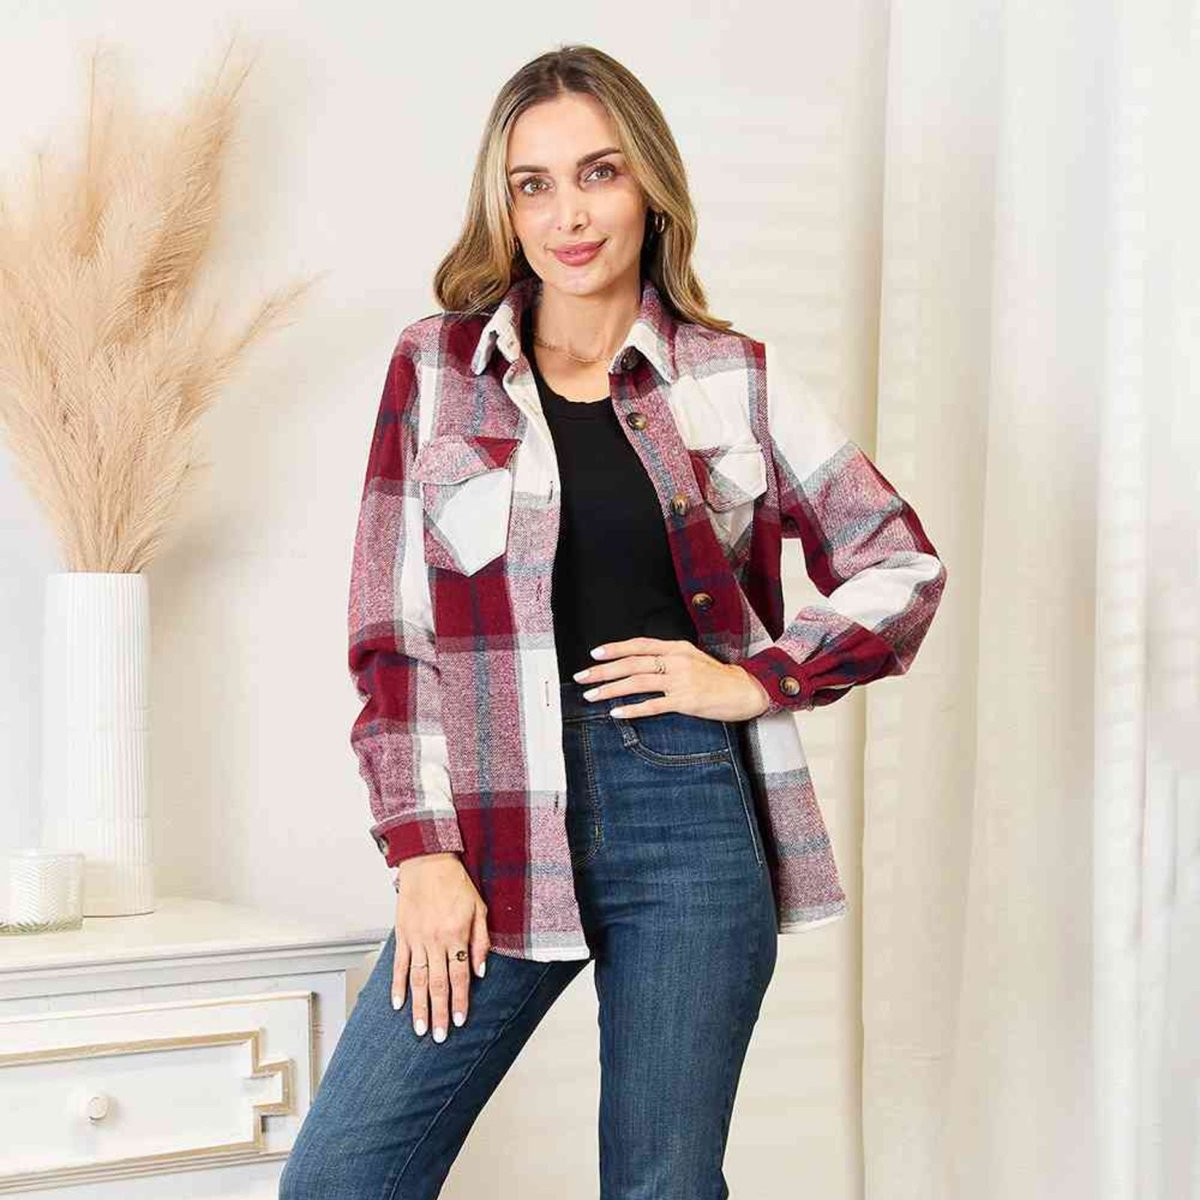 Wrap yourself in warmth with our Double Take Plaid Shirt Jacket! 🧥 Perfect for chilly days or layering up in style. . Get yours now and upgrade your wardrobe game! 😍 💃✨🌐 empirewardrobe.com . Product link: empirewardrobe.com/products/doubl… . #fallfashion #cozystyle